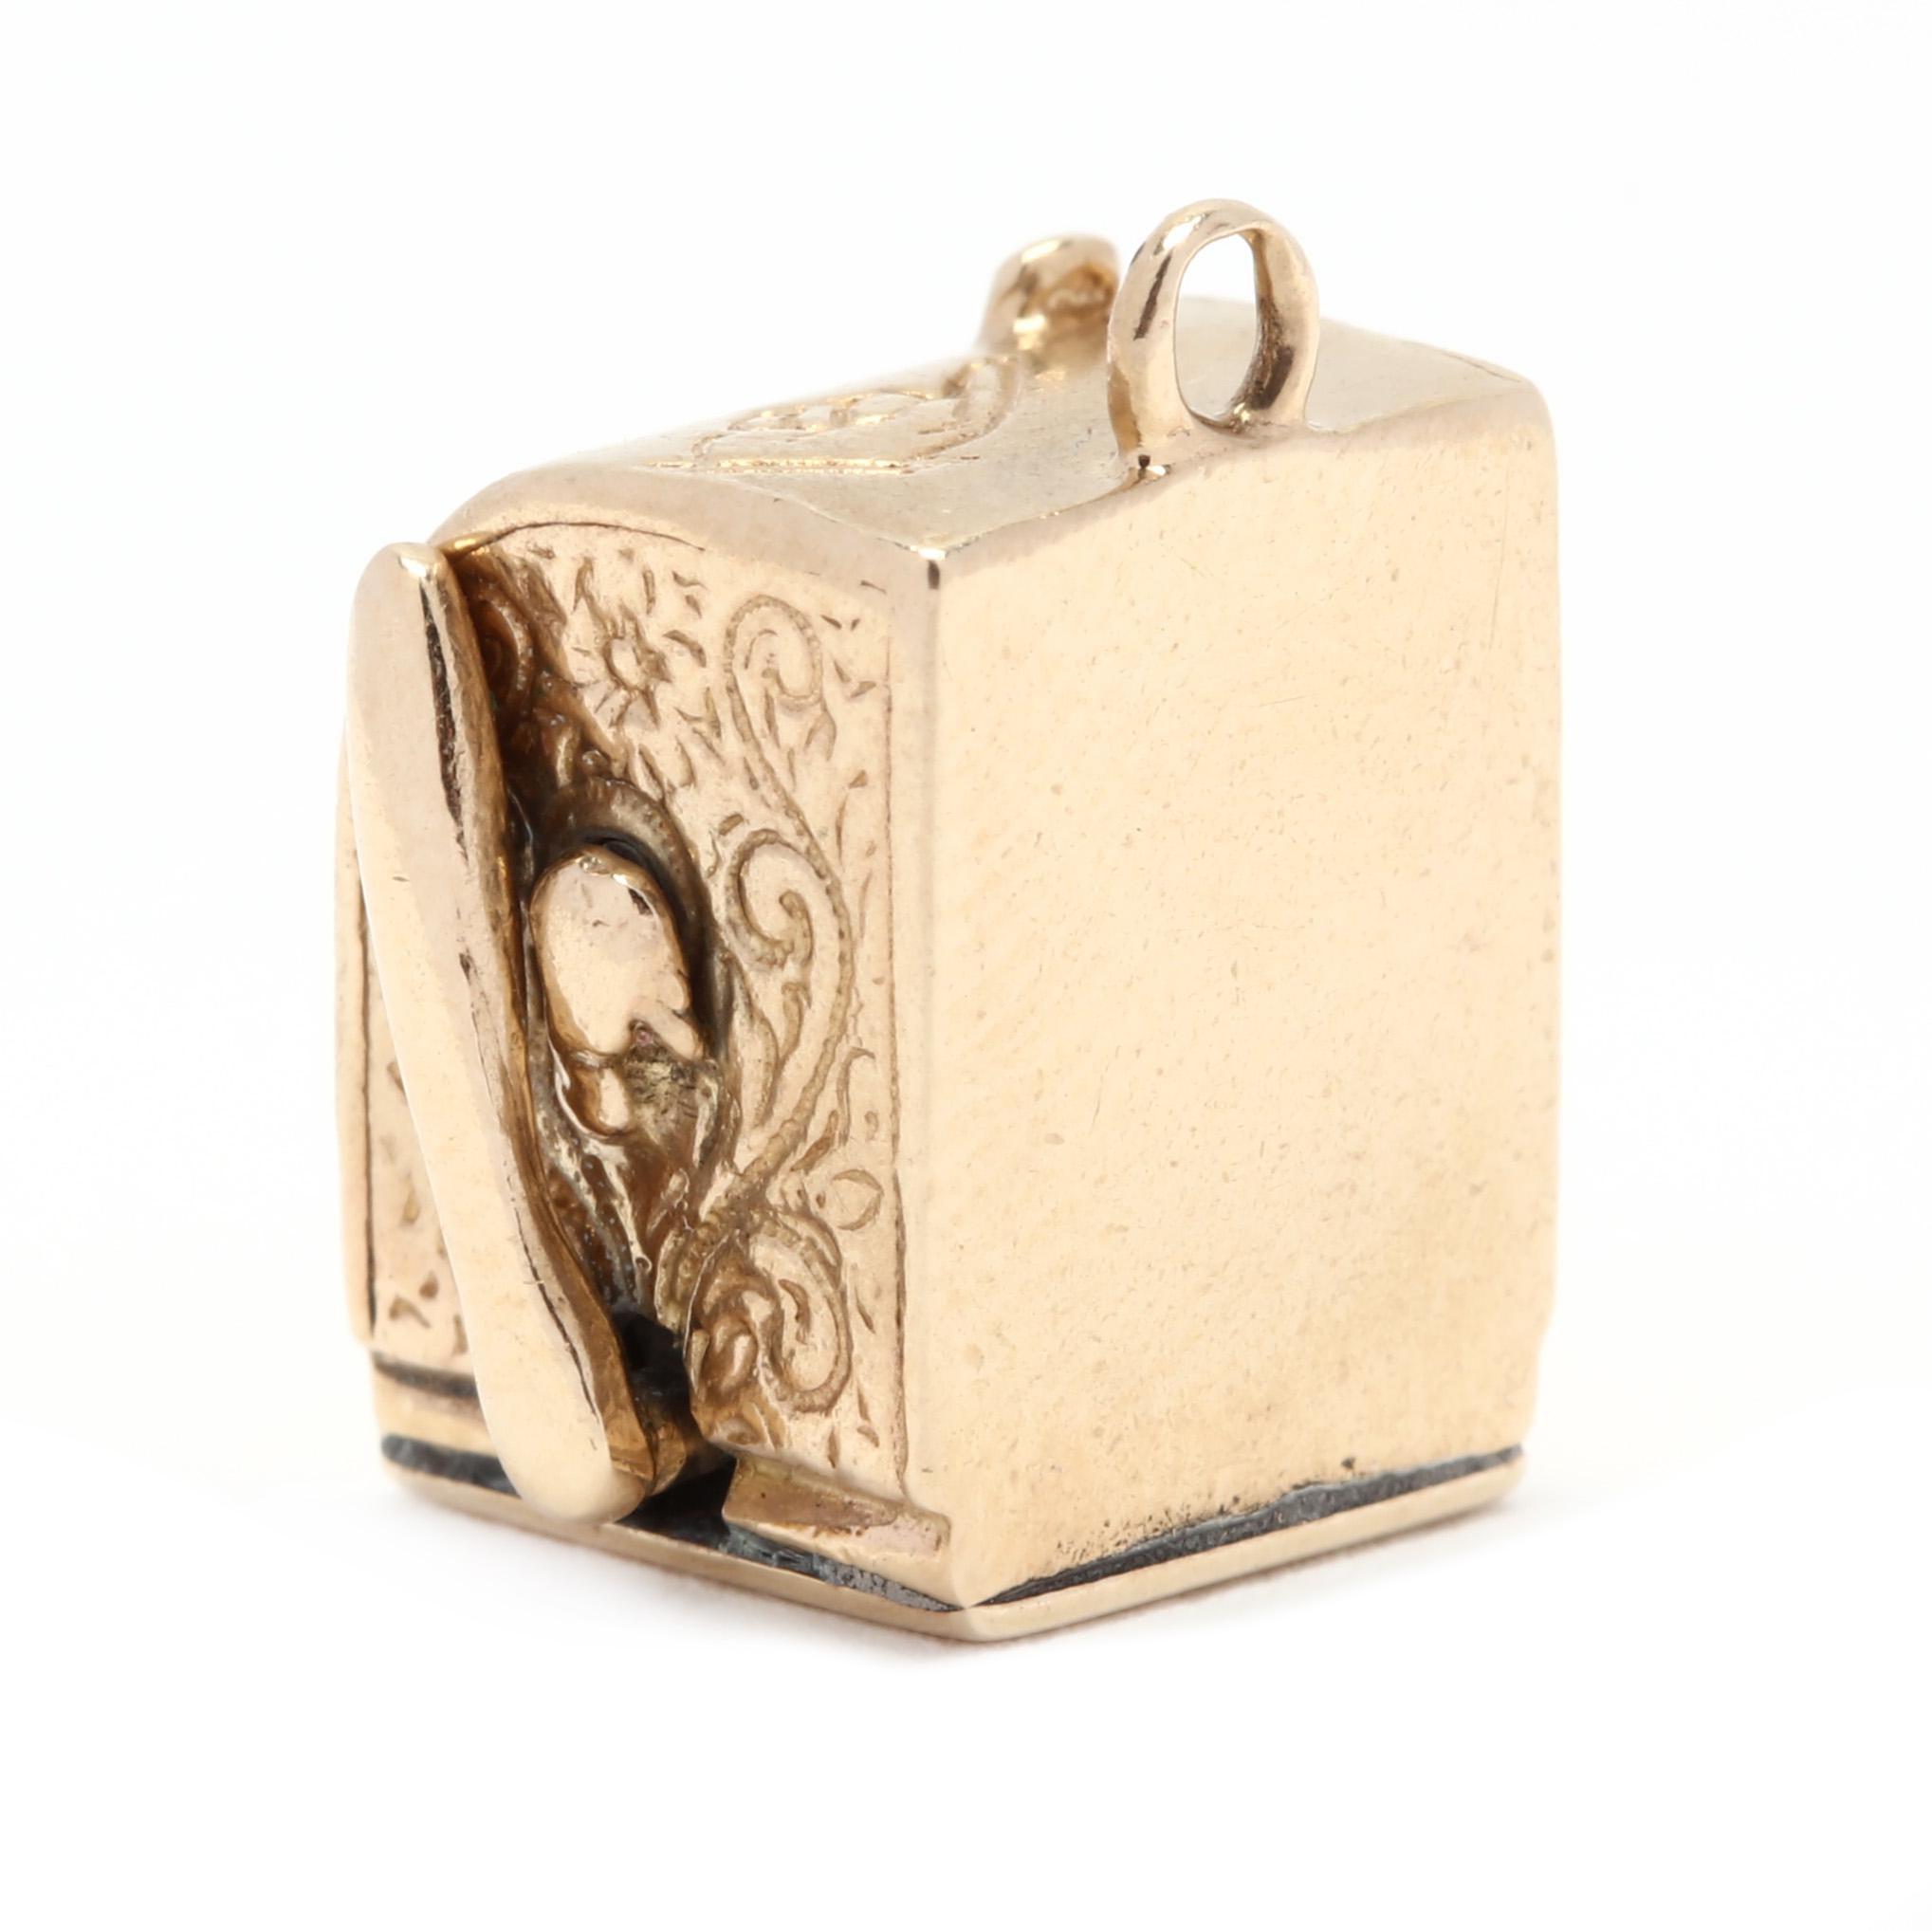 A vintage 14 karat yellow gold slot machine charm. This charm features a three dimensional design of a slot machine with an articulated arm and with engraved detailing.

Length: 1/2 in.

Width: 7/16 in.

4.56 dwts.

* Please note that this is a